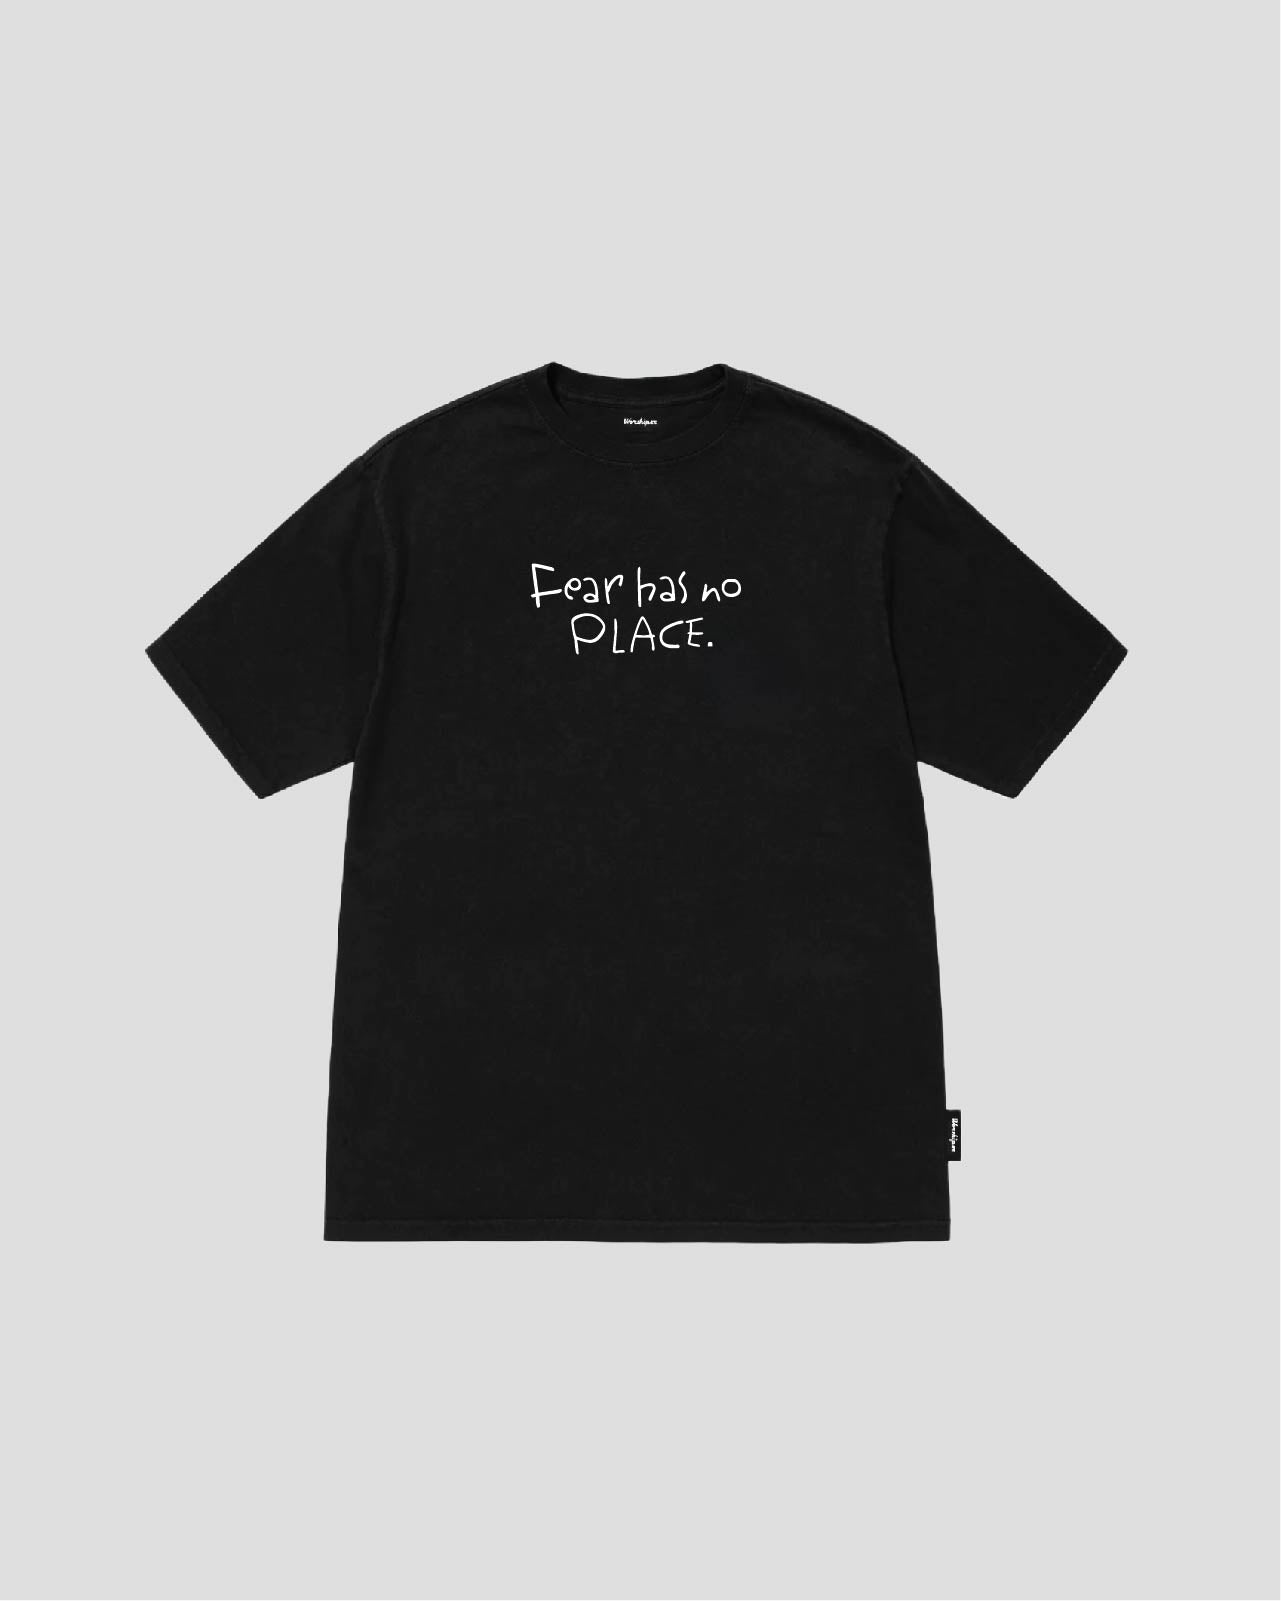 FEAR HAS NO PLACE (WHITE) TEE